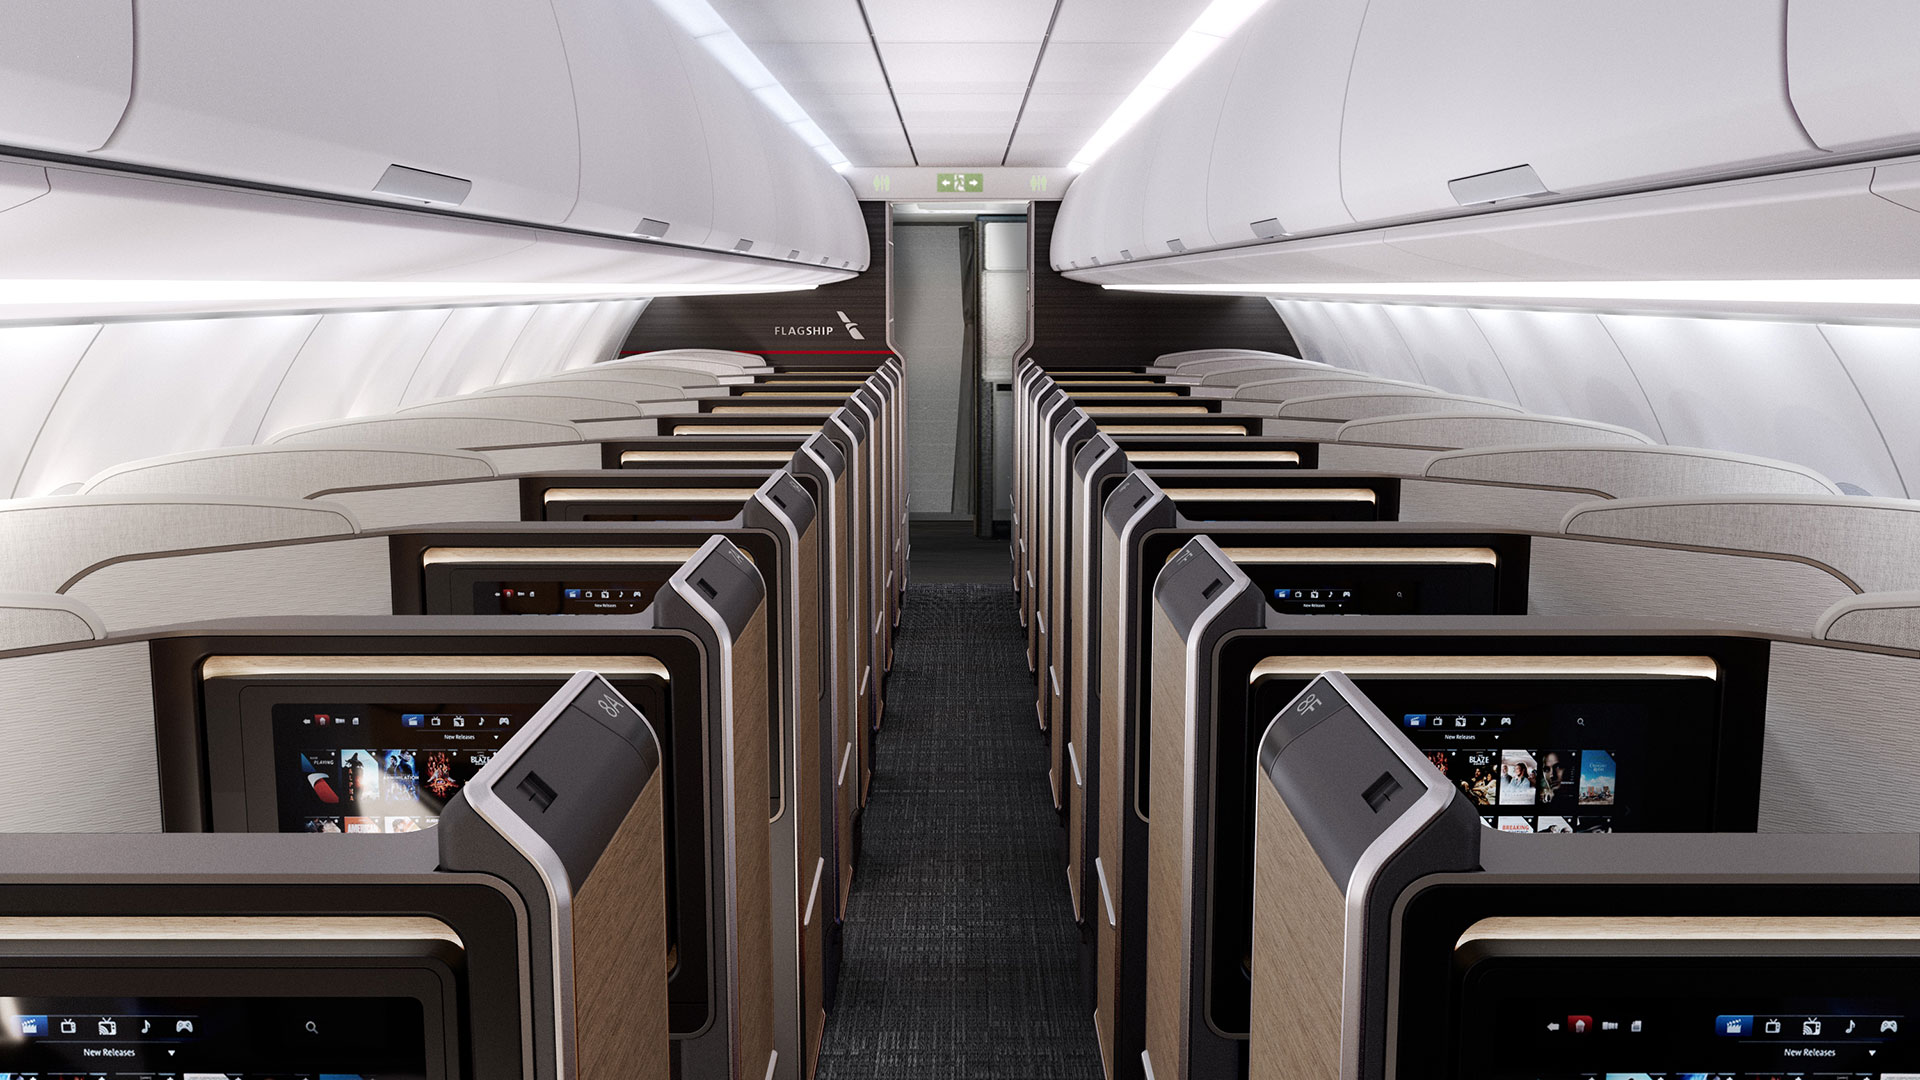 The airbus a321xlr will have 20 flagship suite seats when delivered in 2024 (photo: american airlines)